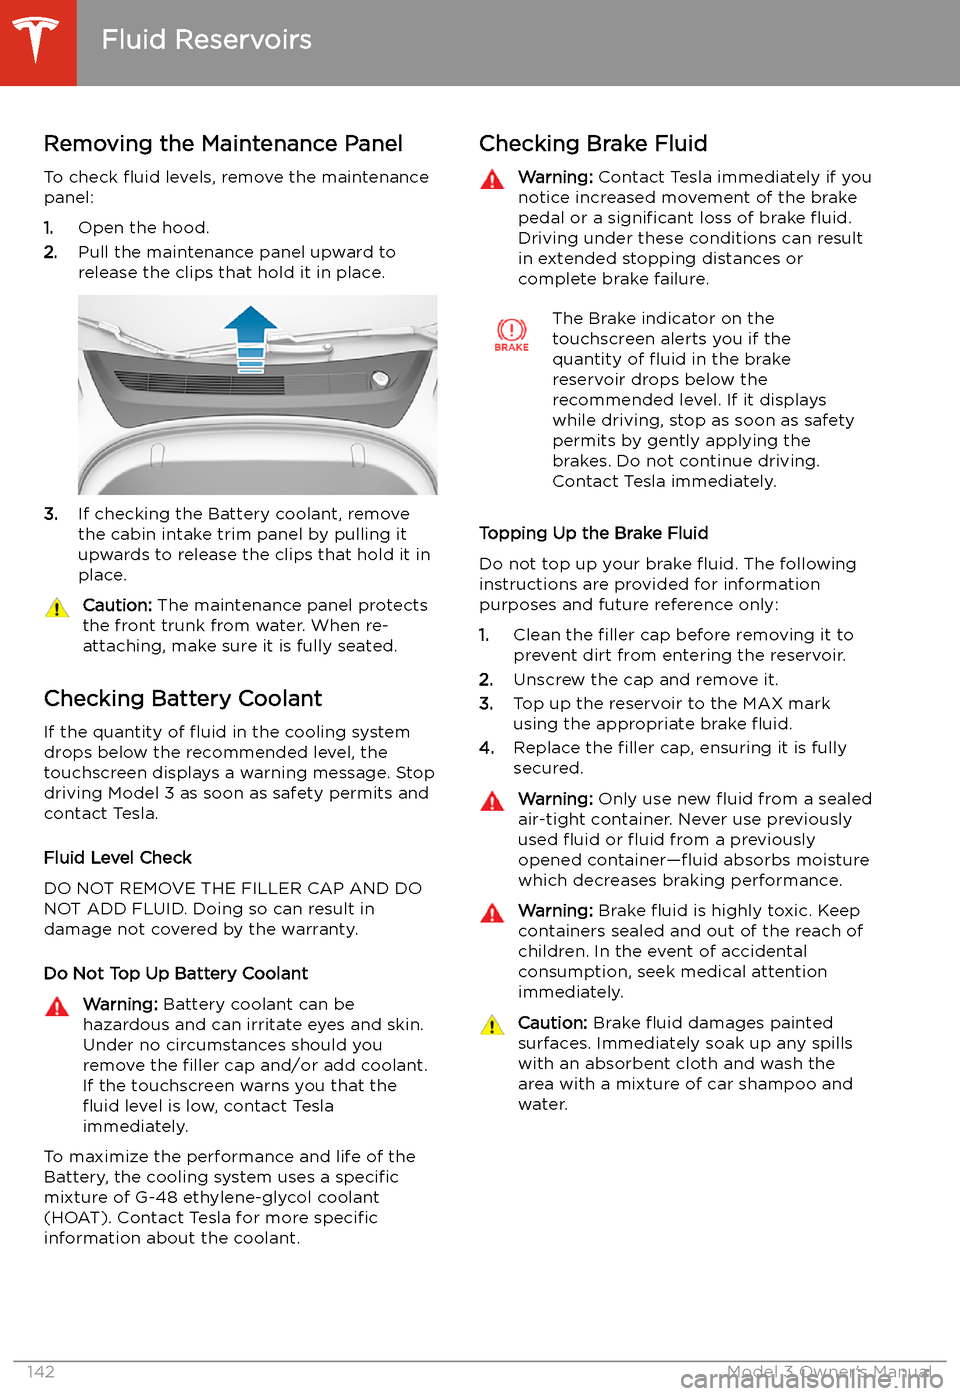 TESLA MODEL 3 2019  Owners Manual (Europe) Fluid Reservoirs
Removing the Maintenance Panel
To check  